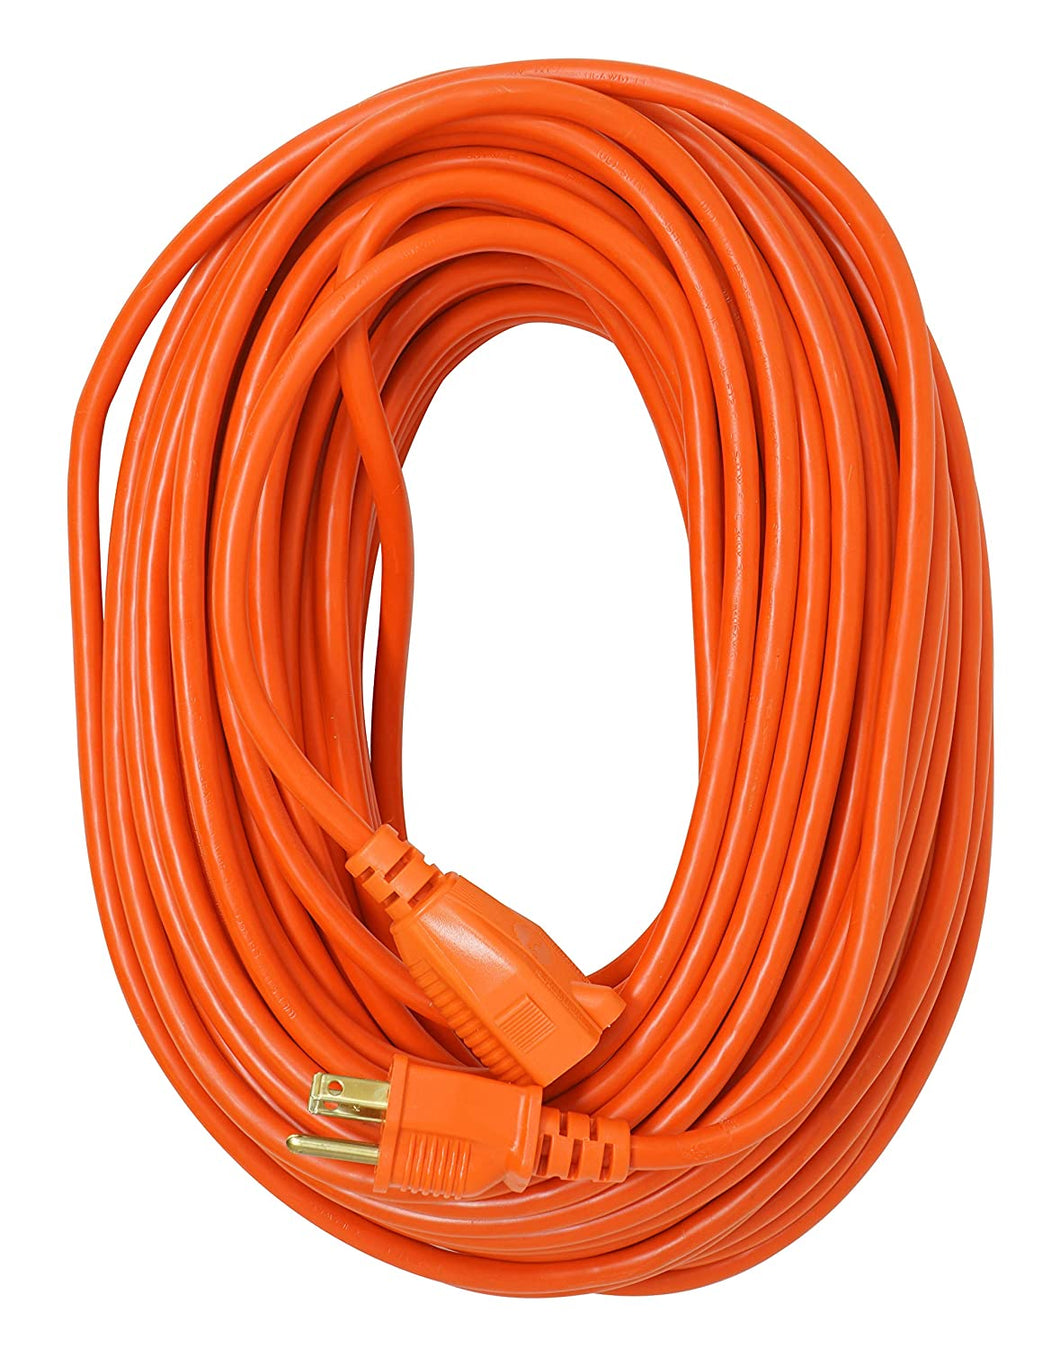 Southwire 2309SW8803 16/3 Vinyl Outdoor Extension Cord, Weather Resistant Flexible Vinyl Jacket, 3- Pronged, 100-Foot Extension Cord, 10 AMP, 1250 Watts, Orange